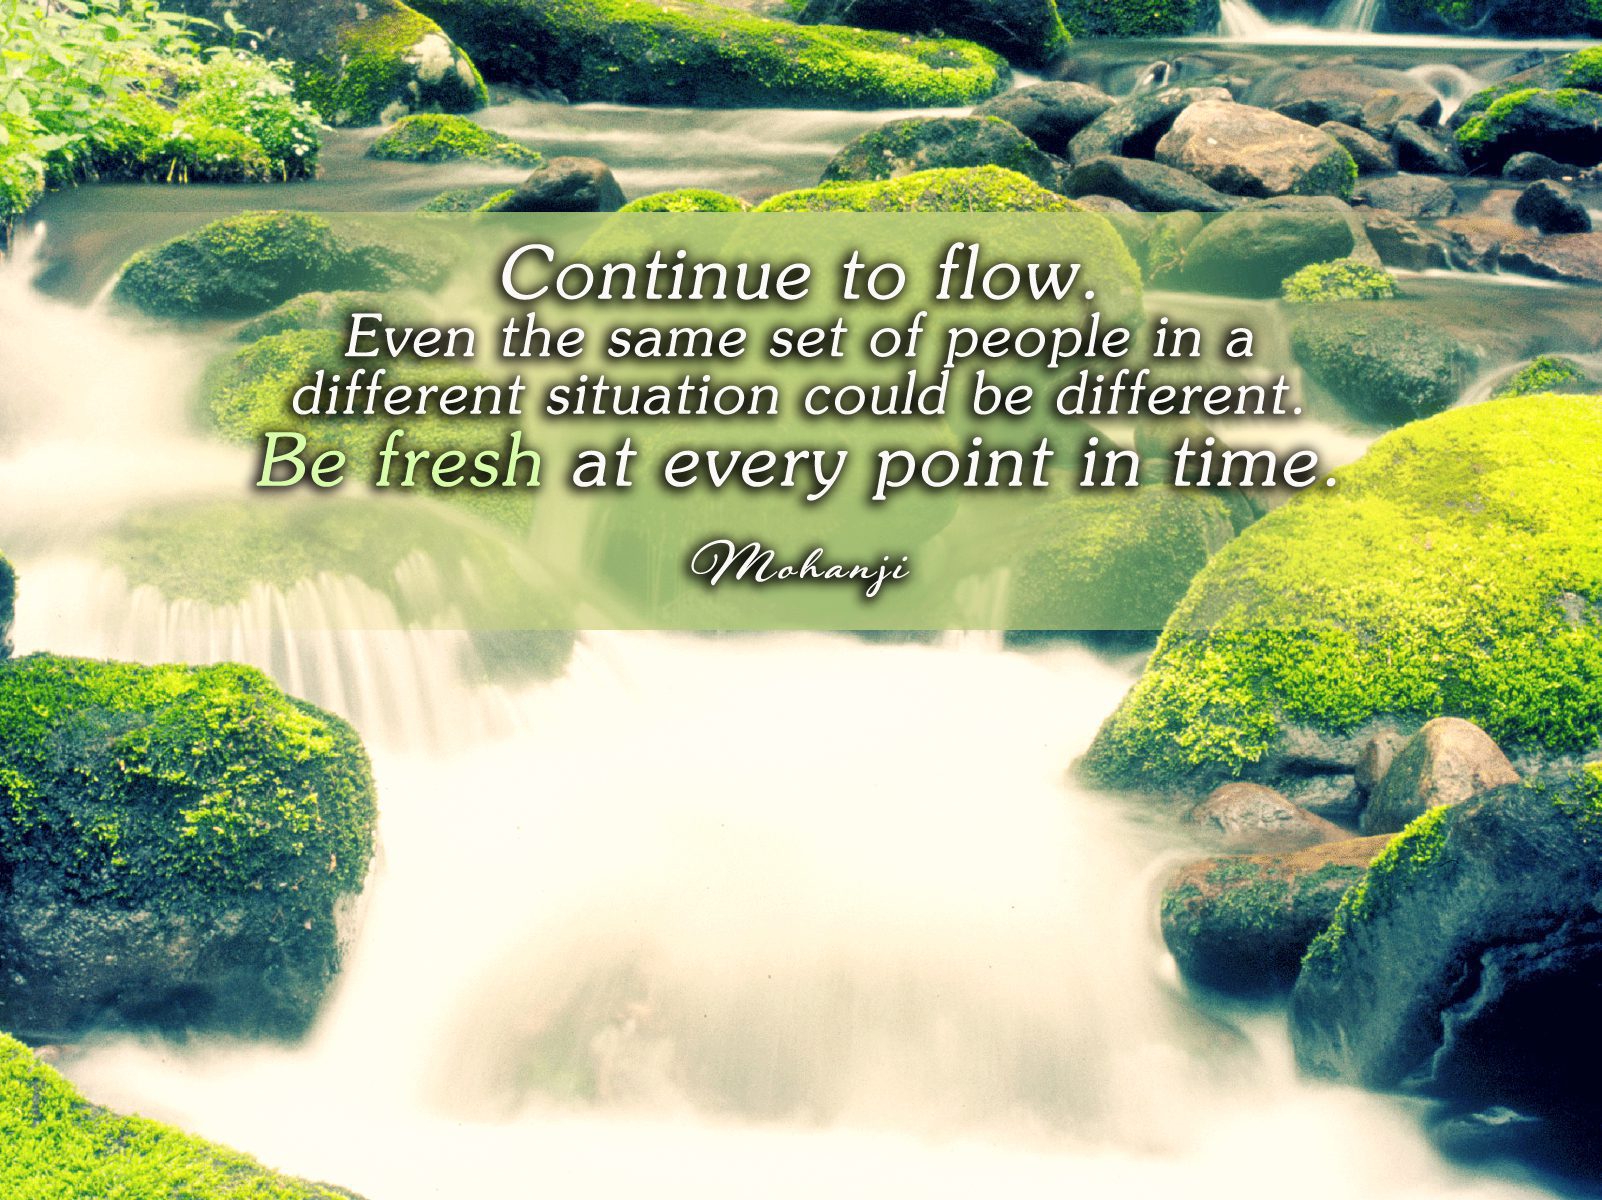 Mohanji quote - Continue to flow